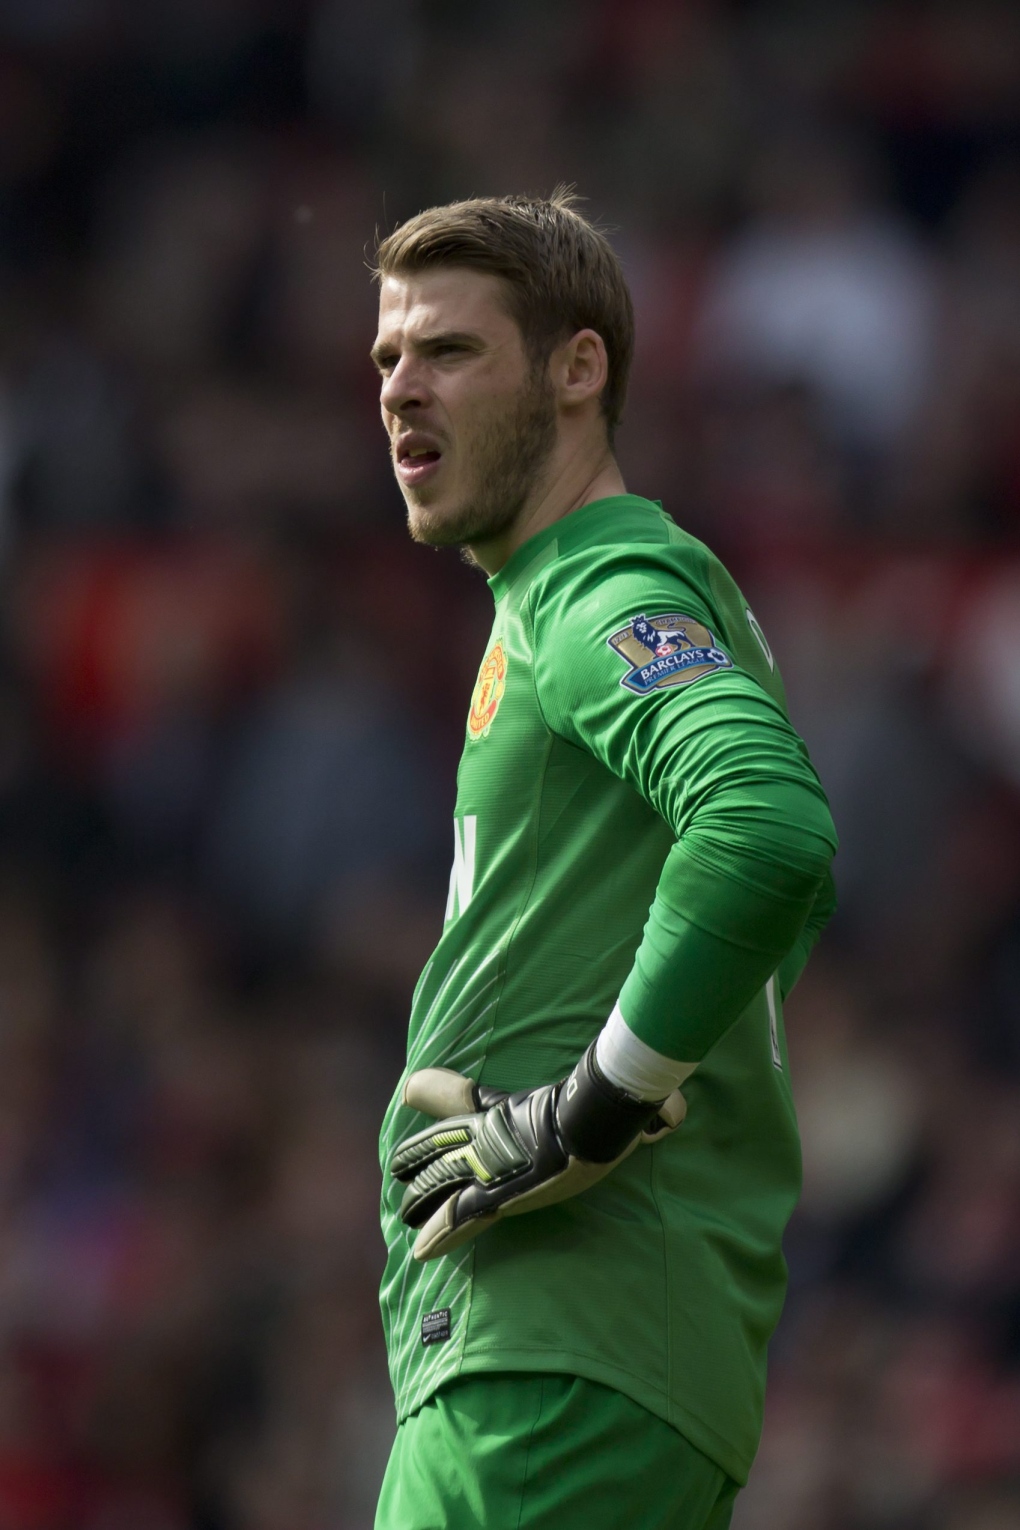 David de Gea could be sidelined after injury